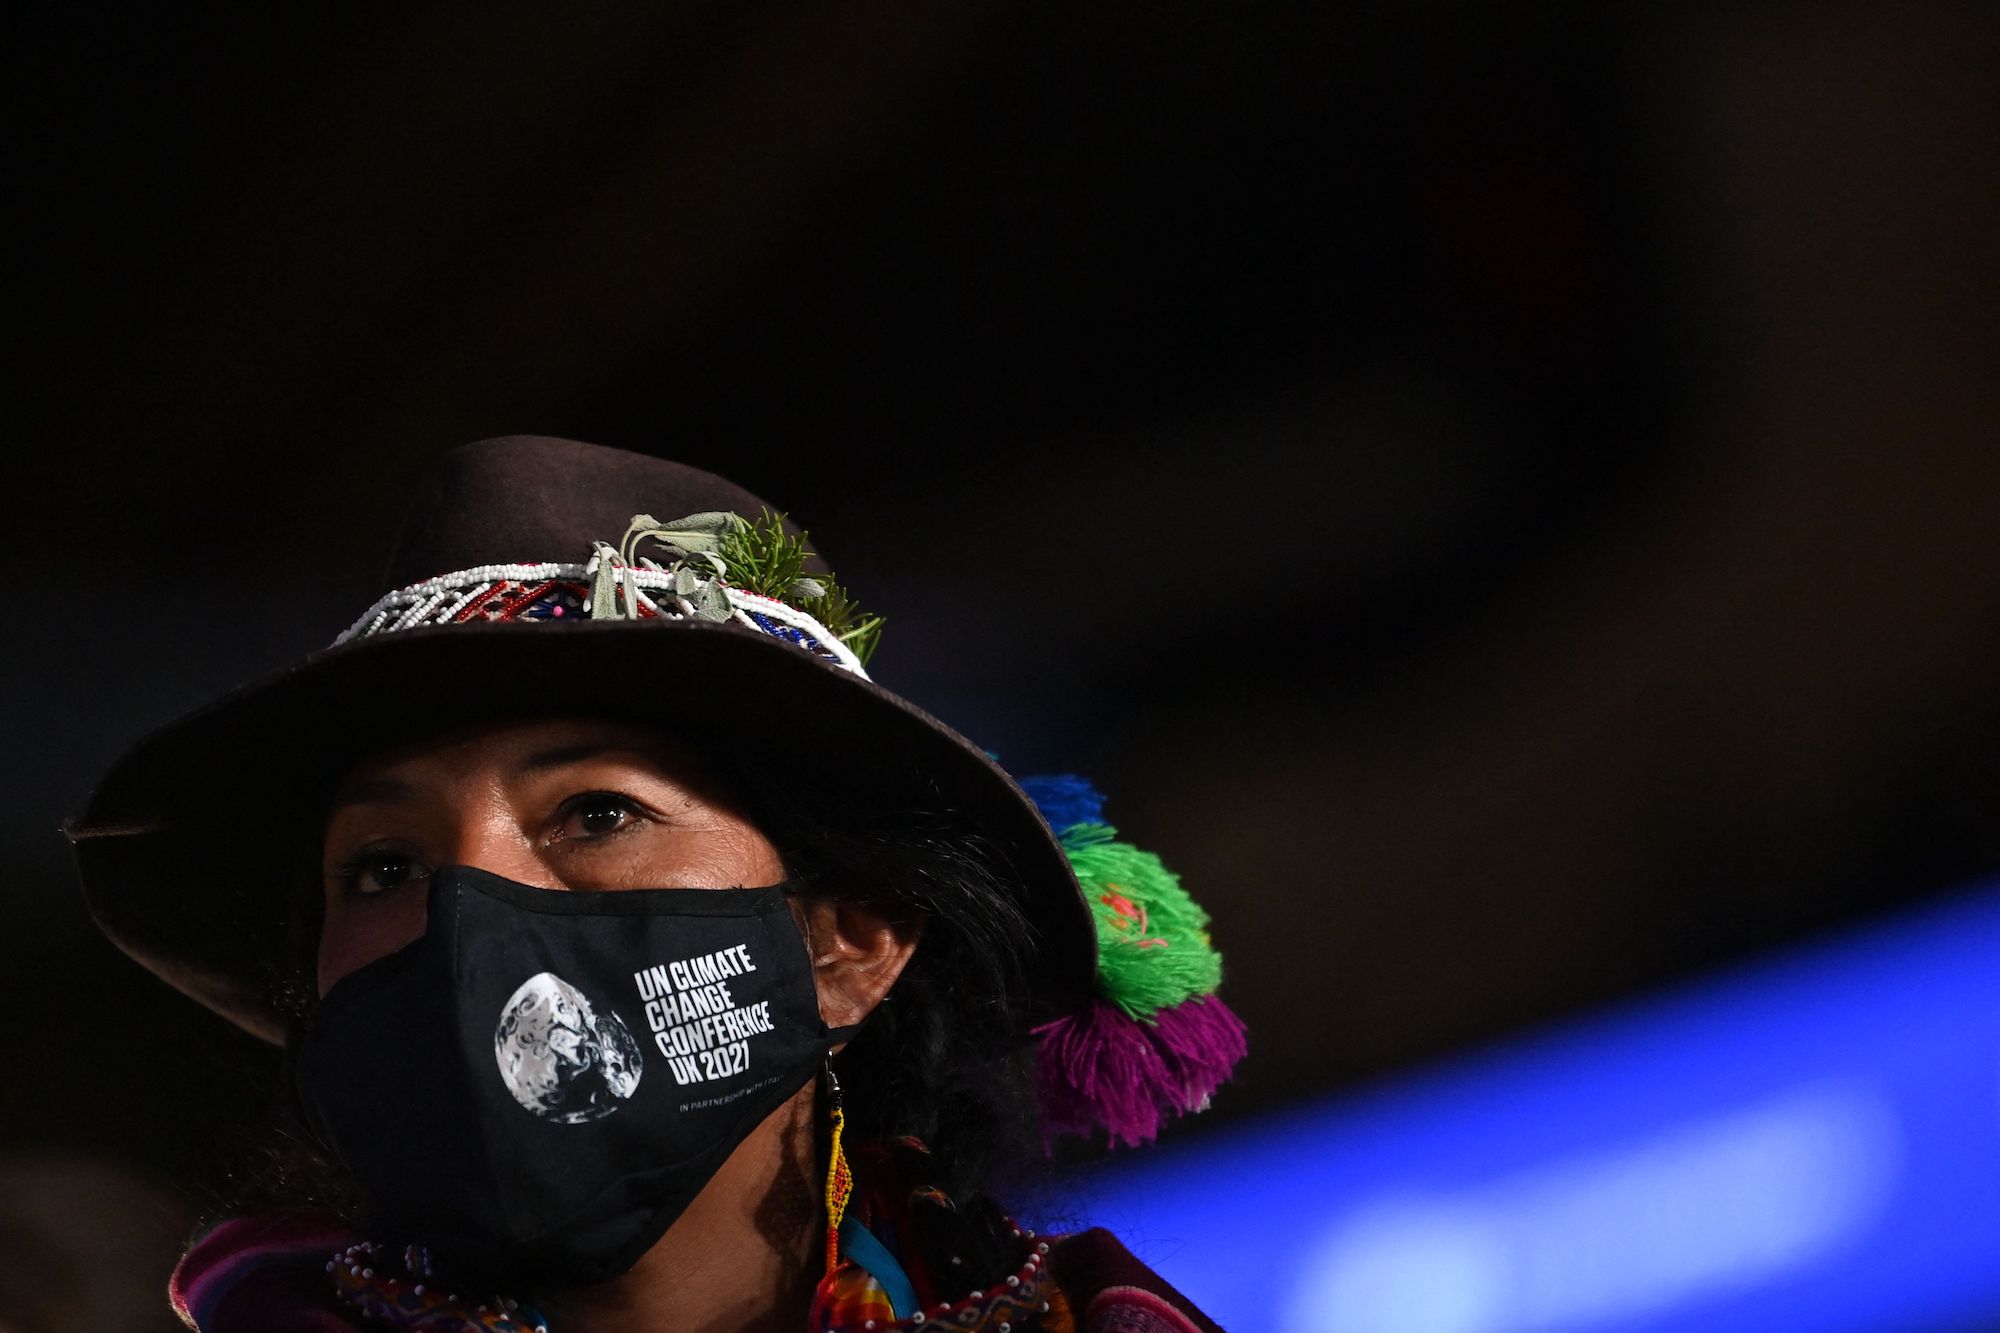 A close up photograph of a woman wearing a traditional quichua hat and a mask with the words 